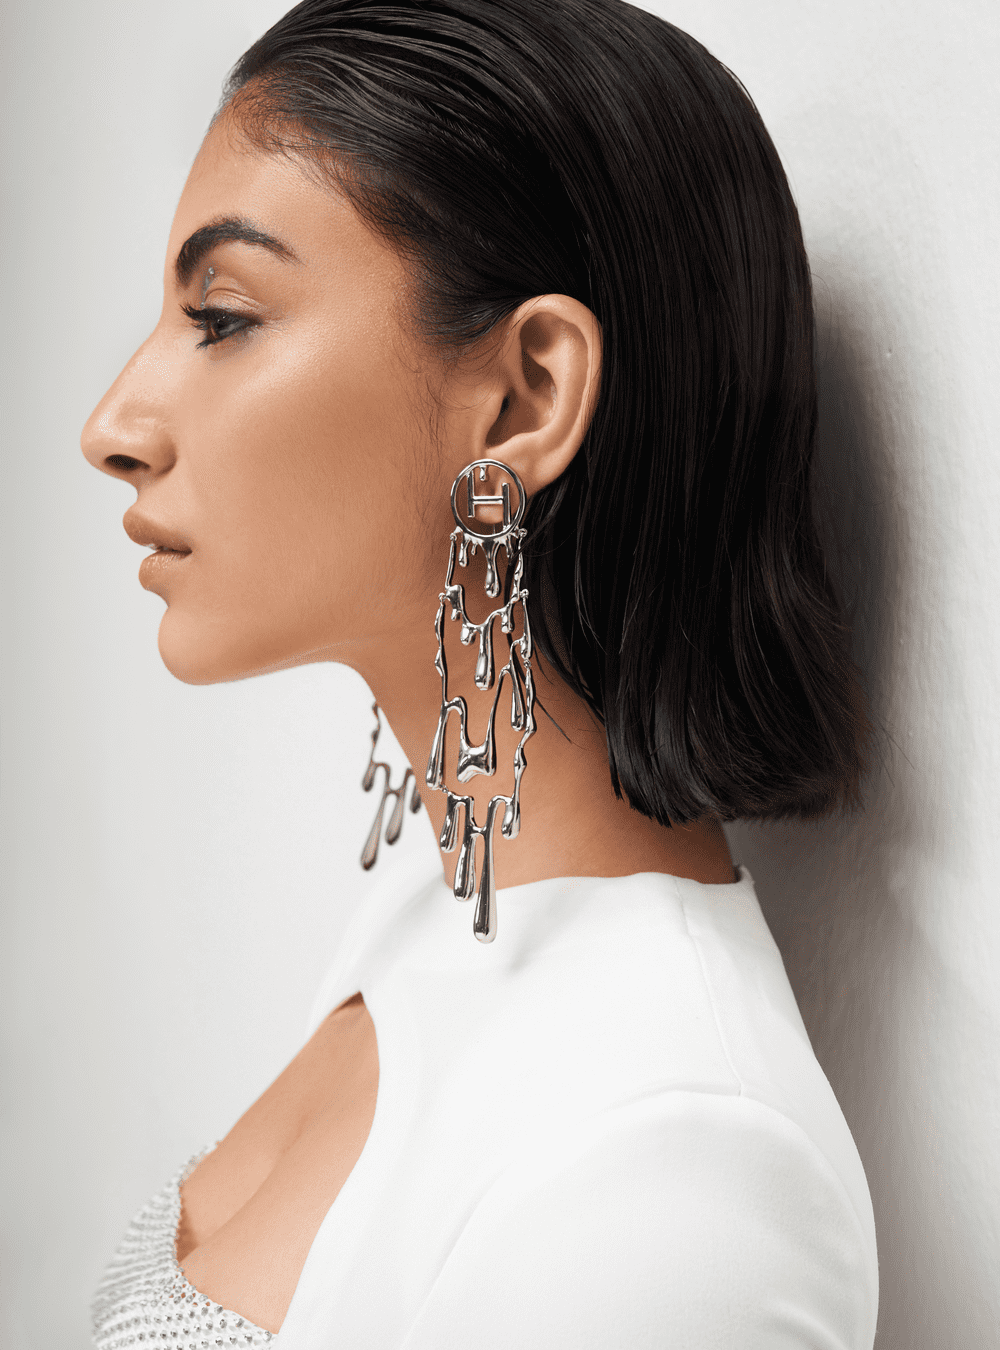 Earrings For Your Face Shape - Holly Yashi